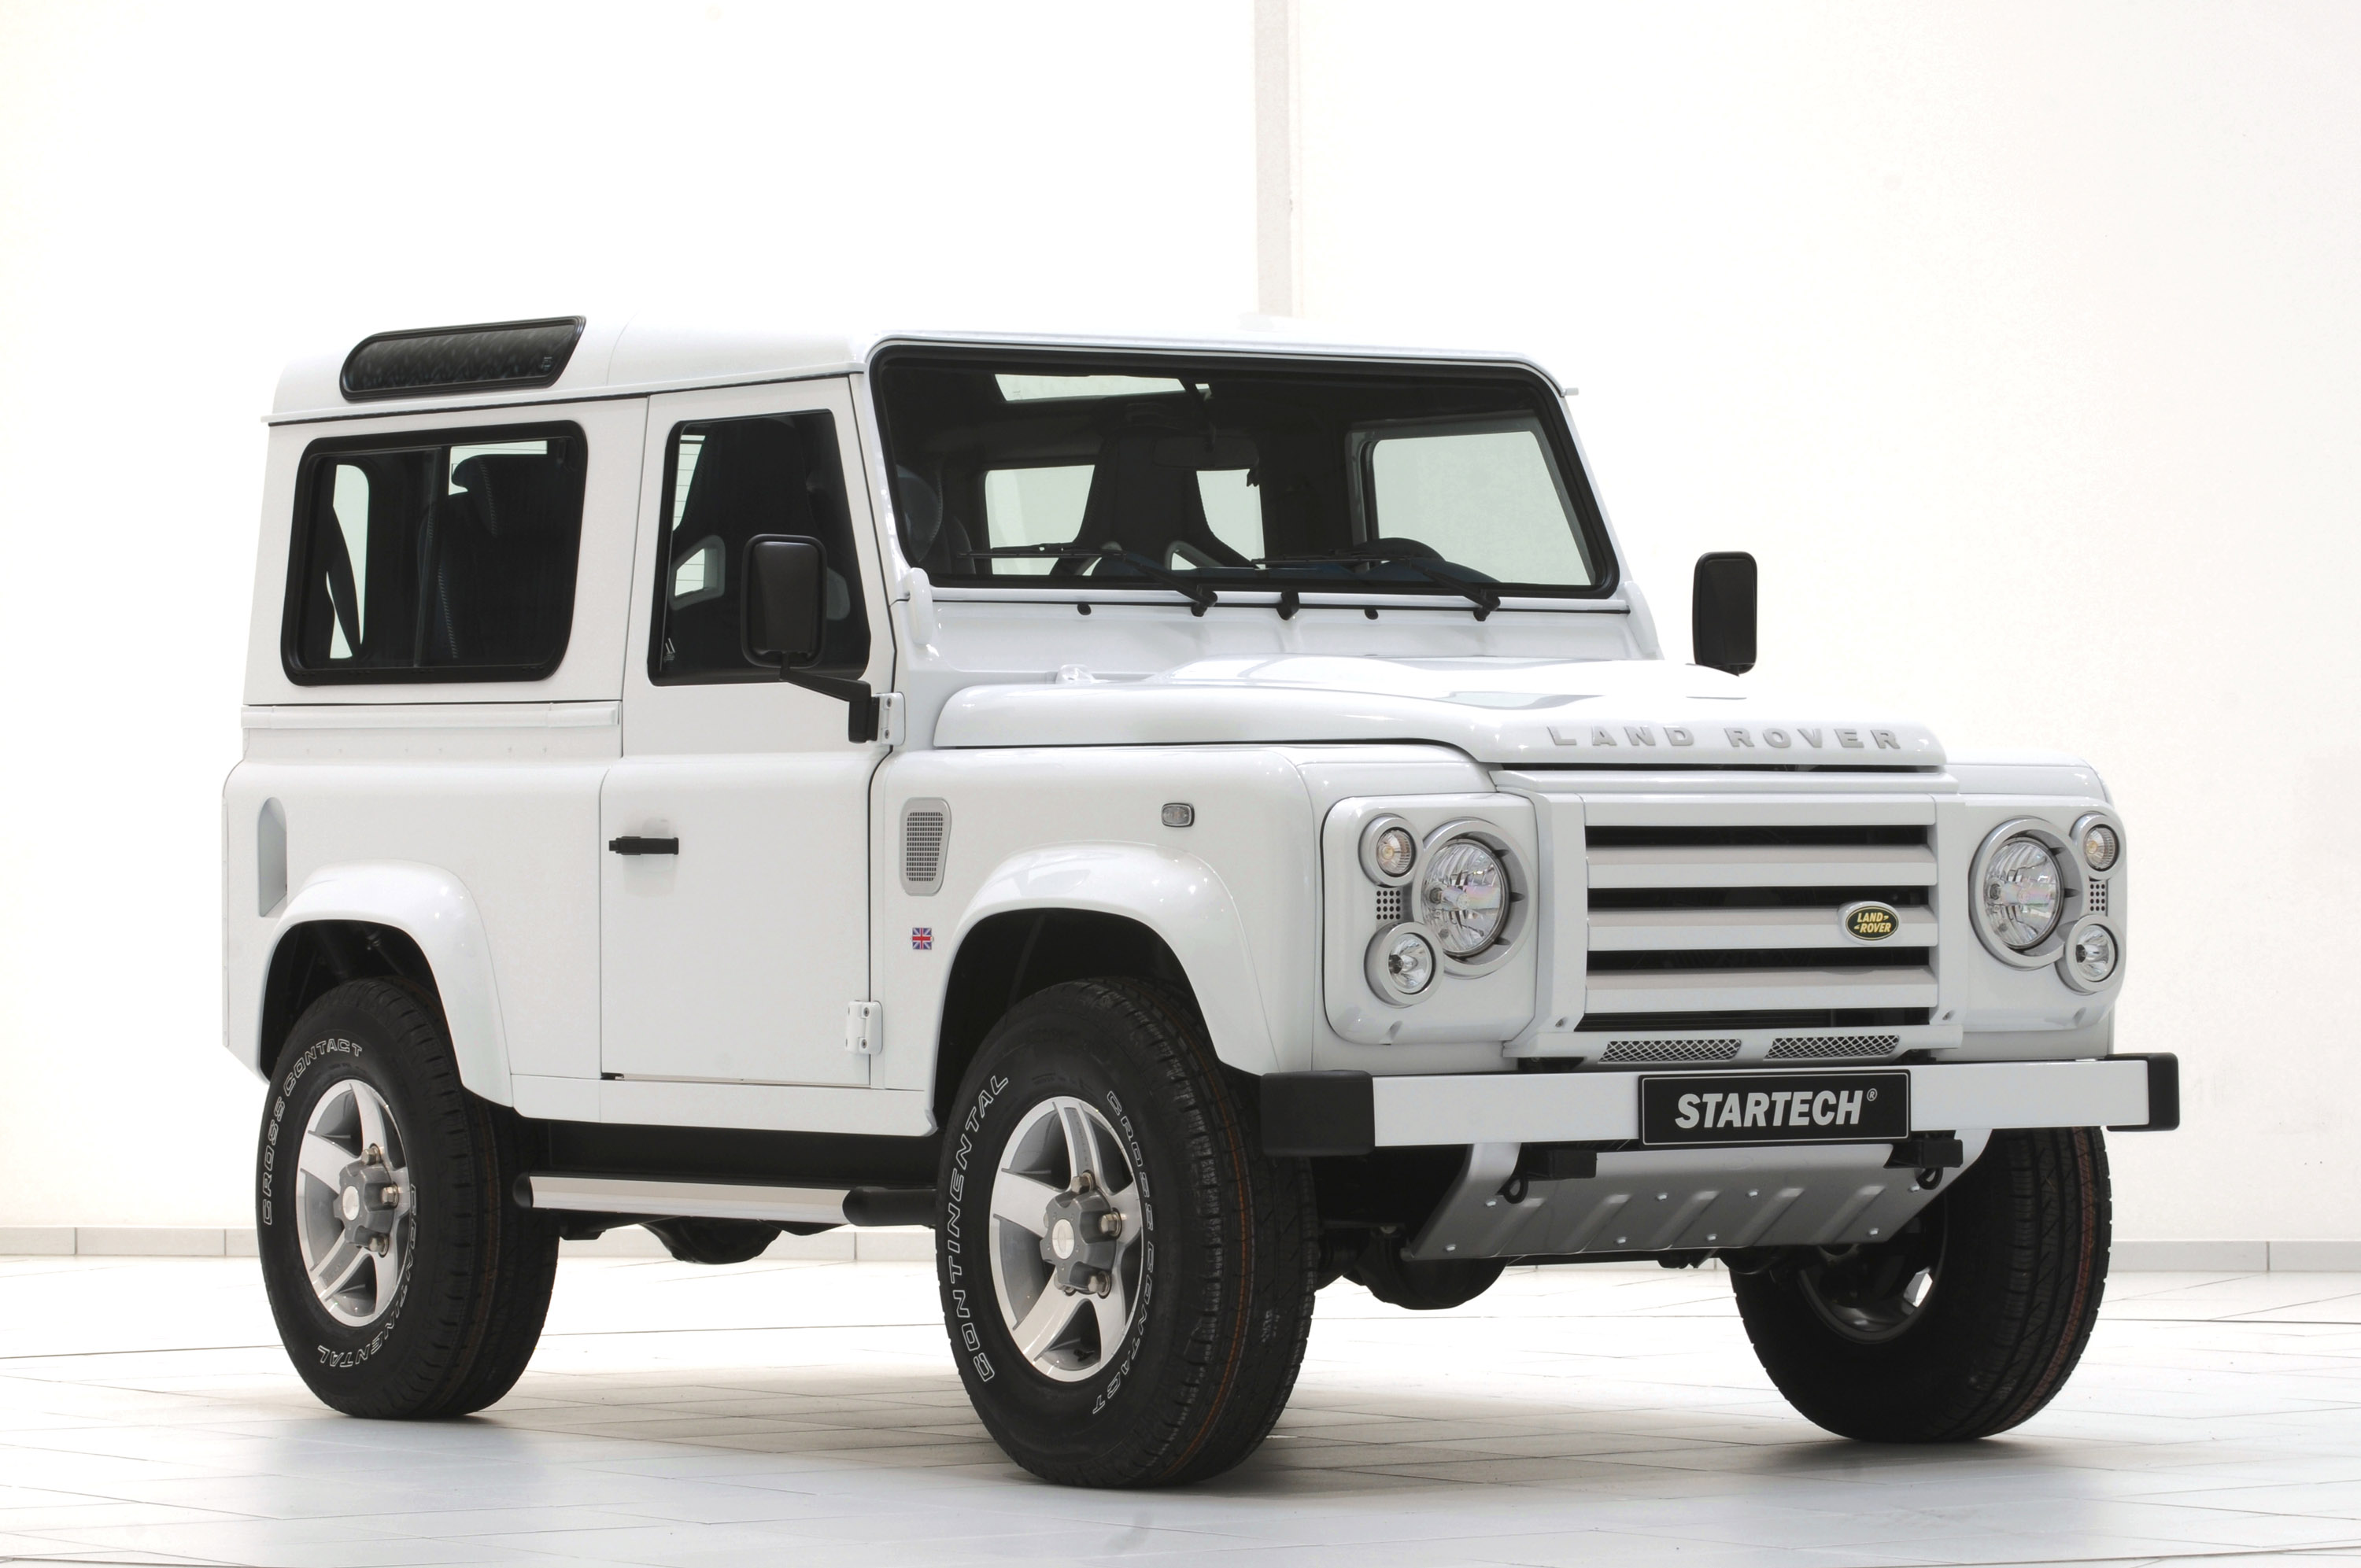 2010, Startech, Land, Rover, Defender, 9 0, Yachting, Suv, 4x4, Offroad Wallpaper